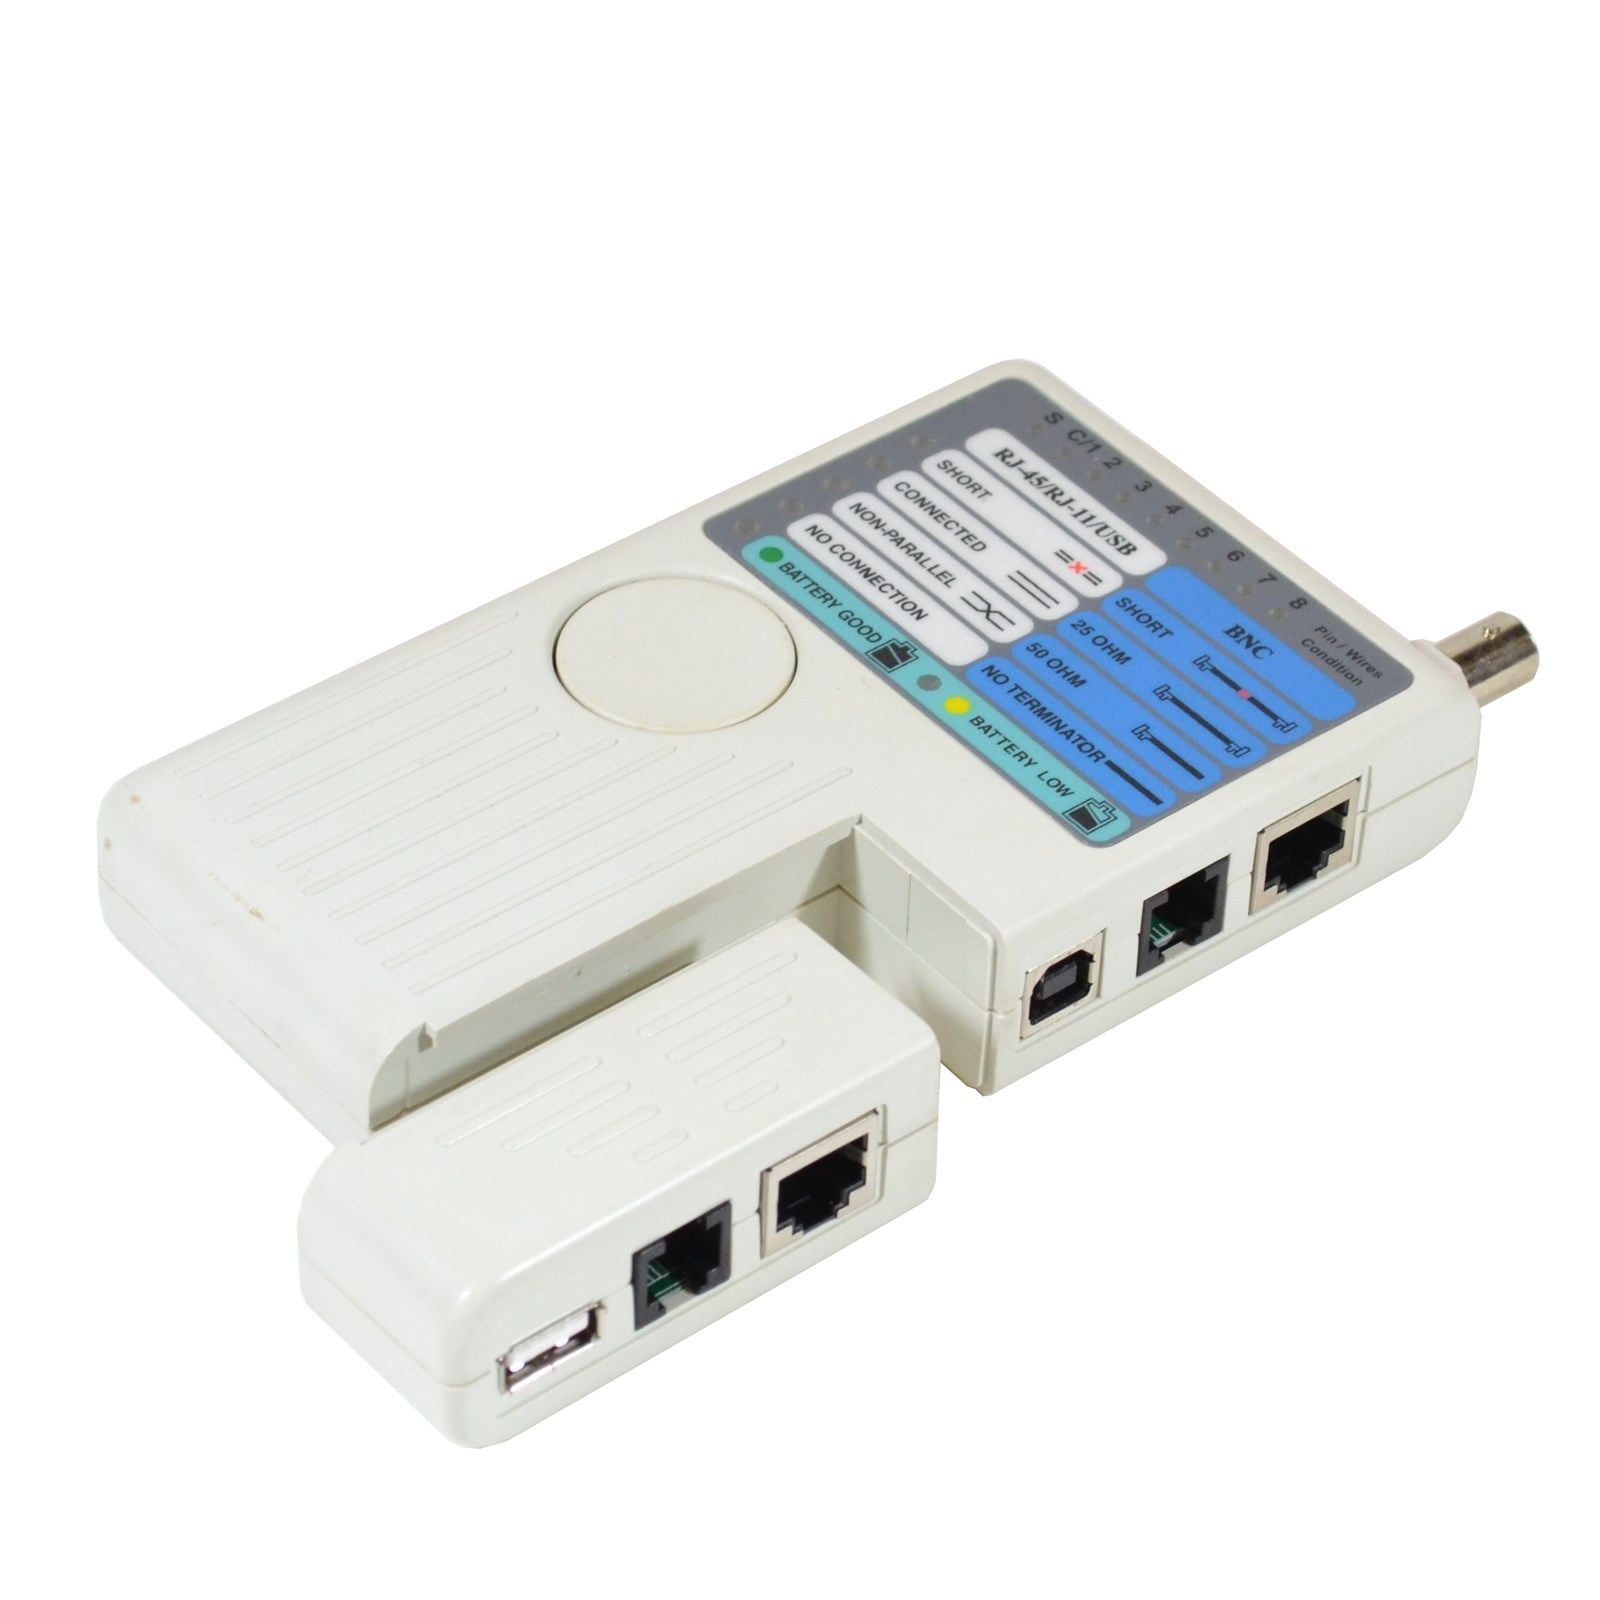 Multi-Tester Black RJ45 3-in-1 RJ11 Details about   Universal Network Cable Tester Tool BNC 